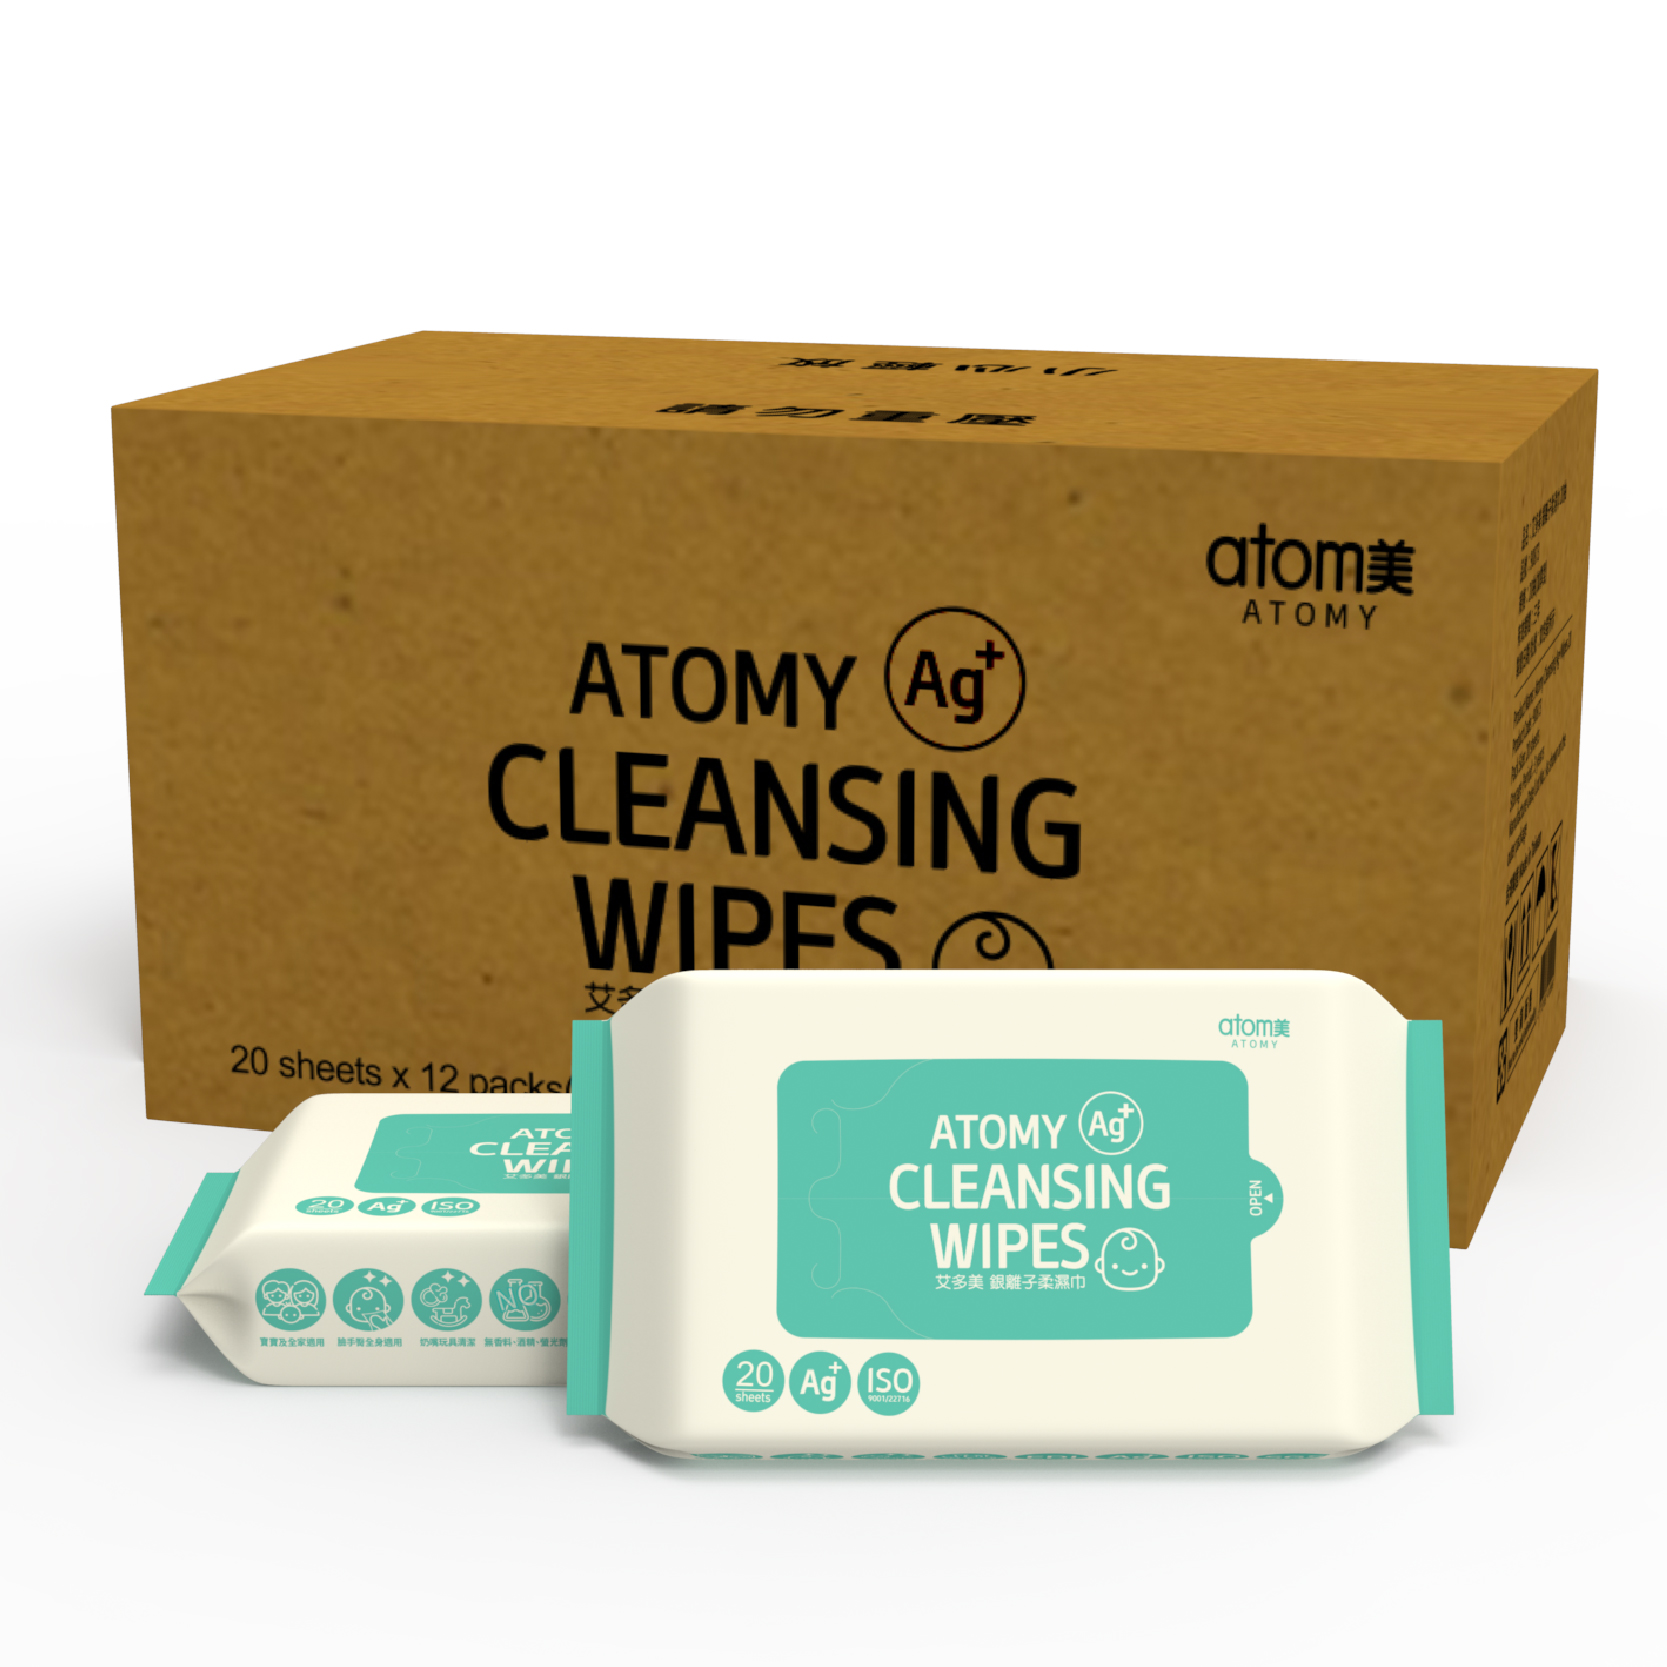 Atomy Ag+ Cleansing Wipes 20 Sheets (12 Packs)  | Atomy Singapore